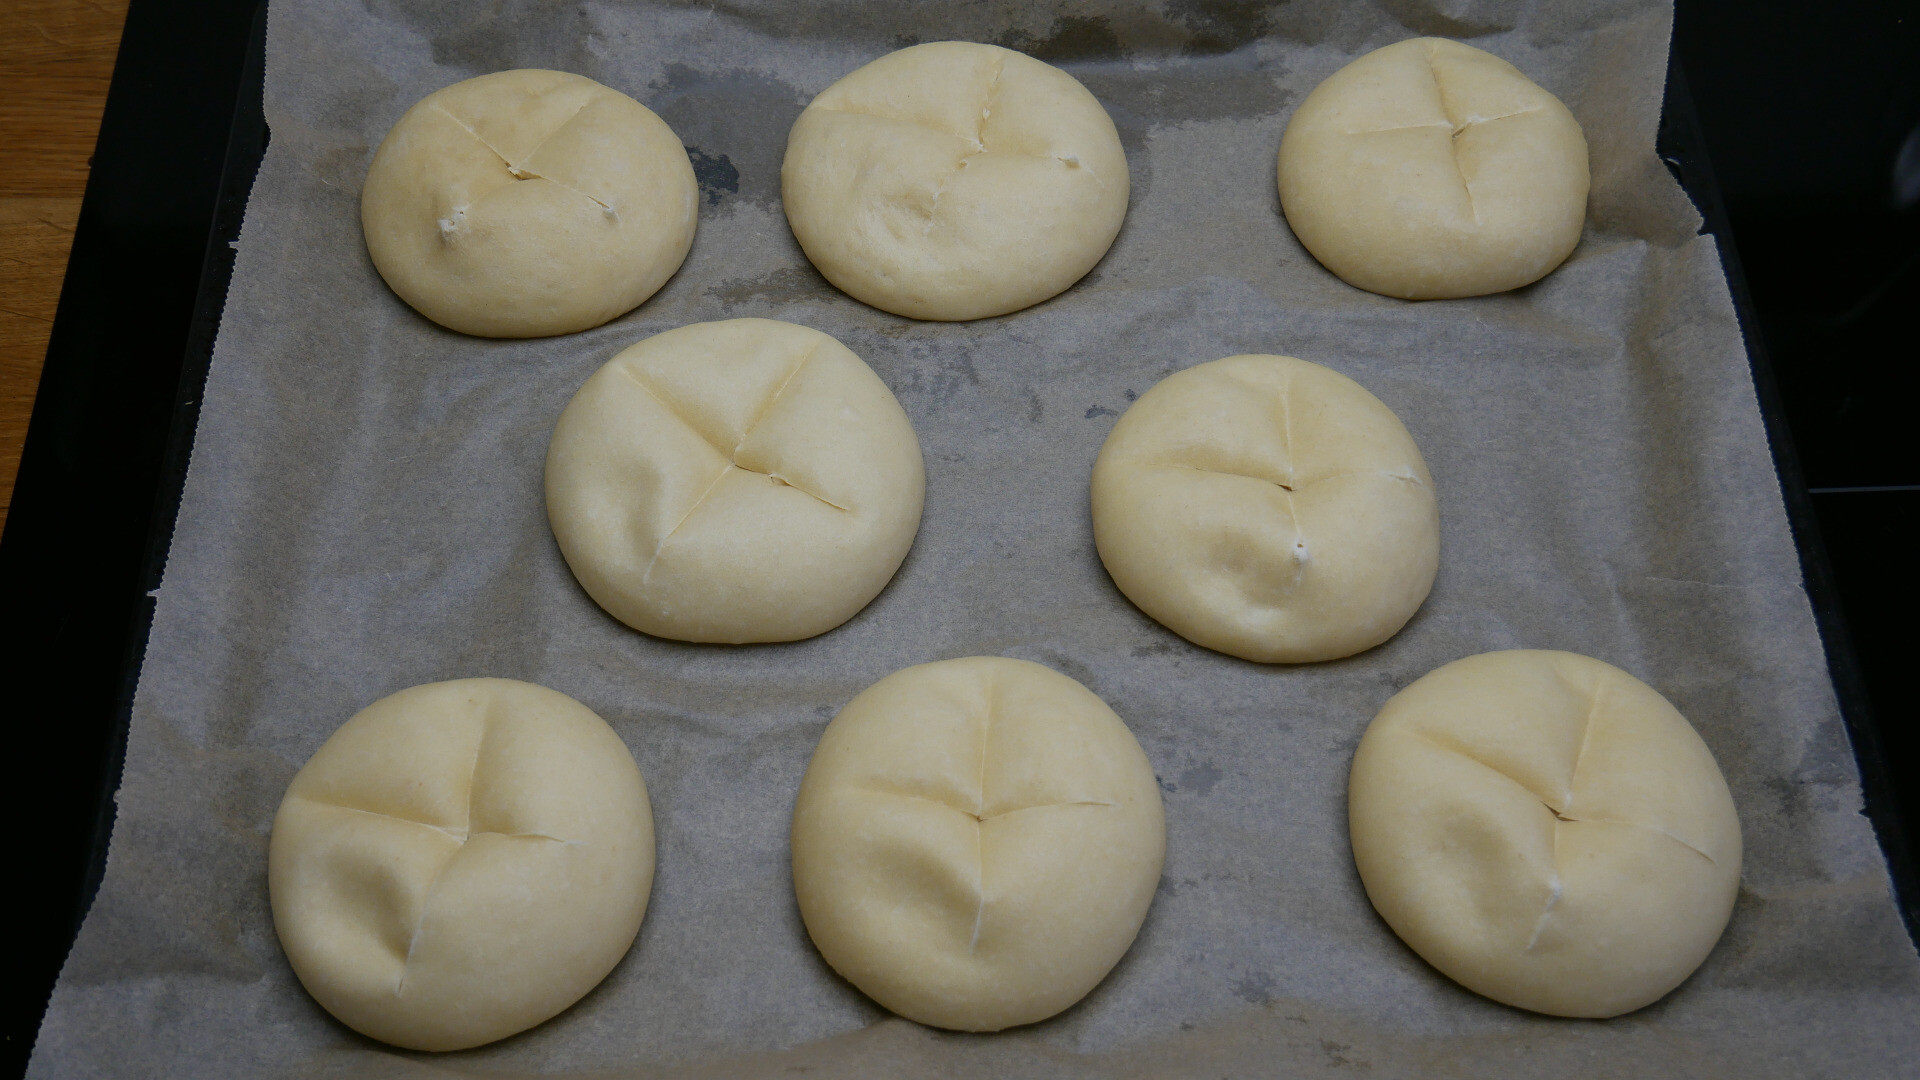 Discs and balls of yeast dough on a baking tray after proving with incisions 